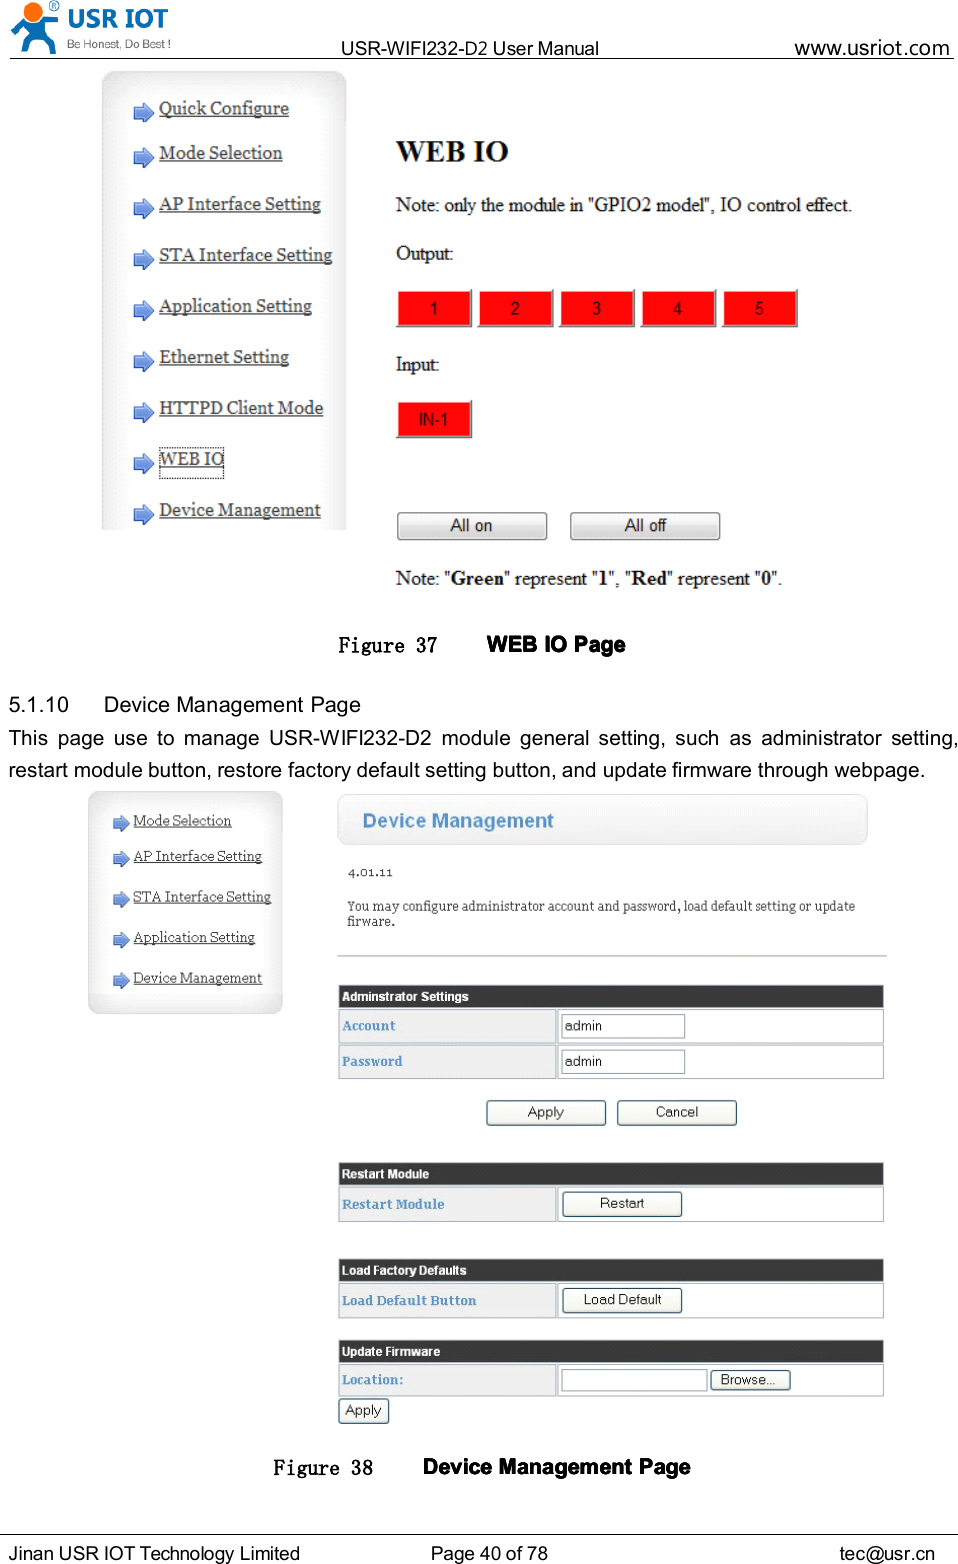 USR-WIFI232- D2 User Manual www.usr iot .comJinan USR IOT Technology Limited Page 40 of 78 tec@usr.cnFigure 37 WEBWEBWEBWEB IOIOIOIO PagePagePagePage5.1.10 Device Management PageThis page use to manage USR-WIFI232-D2 module general setting, such as administrator setting,restart module button, restore factory default setting button, and update firmware through webpage.Figure 38 DeviceDeviceDeviceDevice ManagementManagementManagementManagement PagePagePagePage